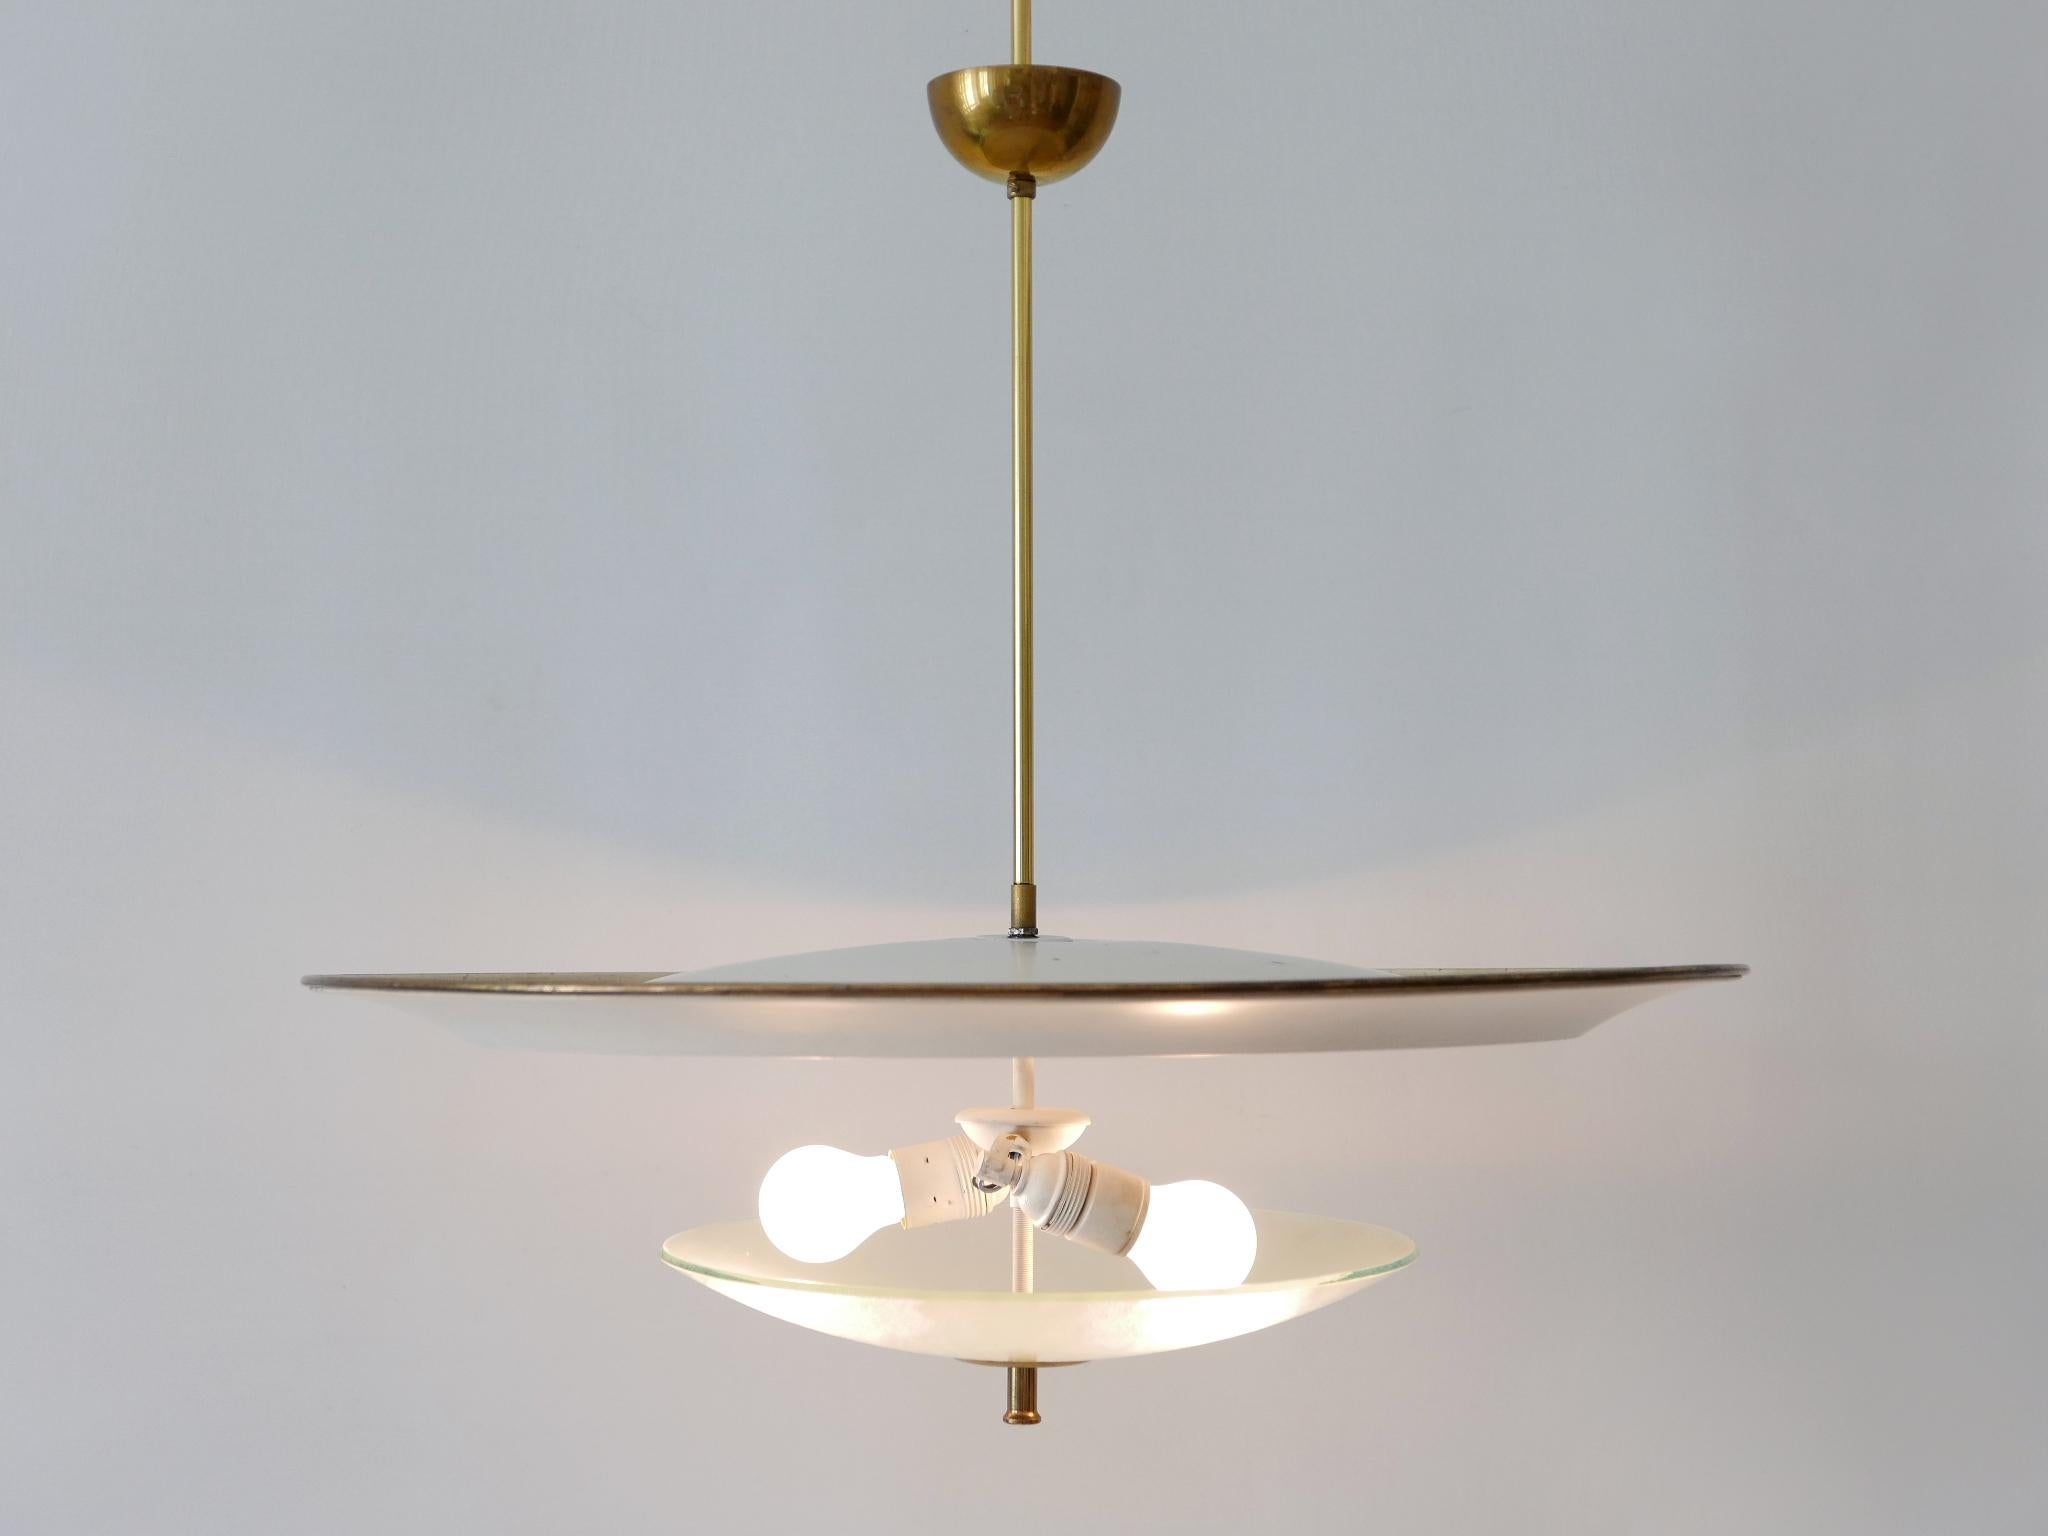 Large Mid-Century Modern 'Ufo' Ceiling Light or Pendant Lamp Germany 1950s № 3 For Sale 2